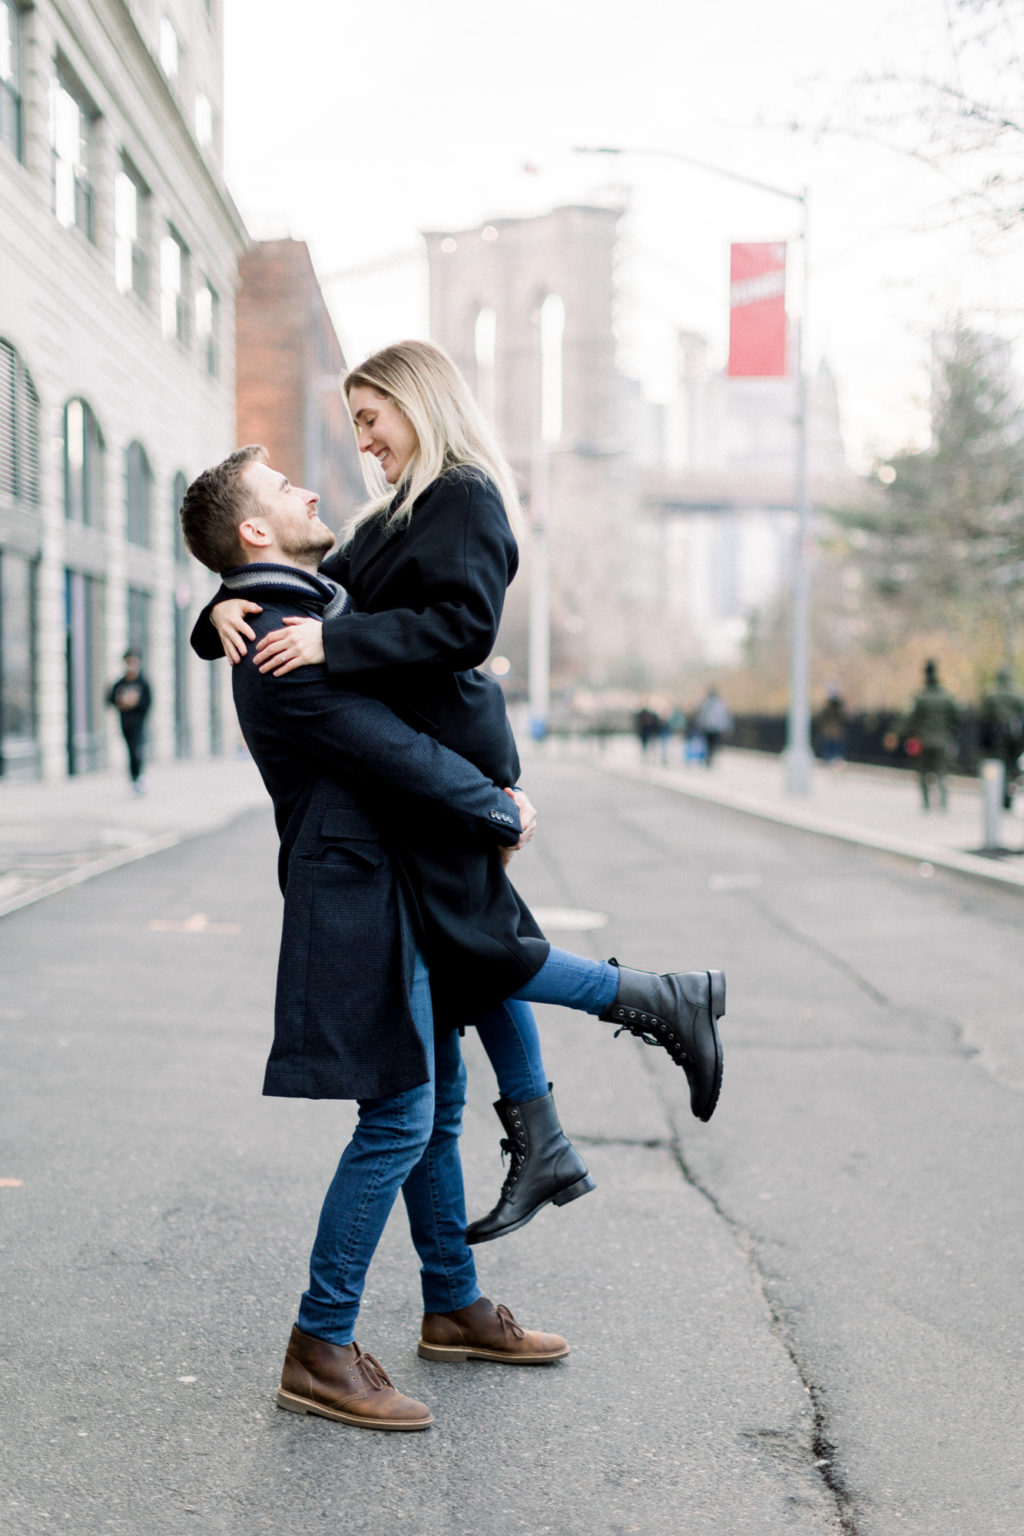 Dumbo Proposal in Winter with NYC Skyline and Brooklyn Bridge Views